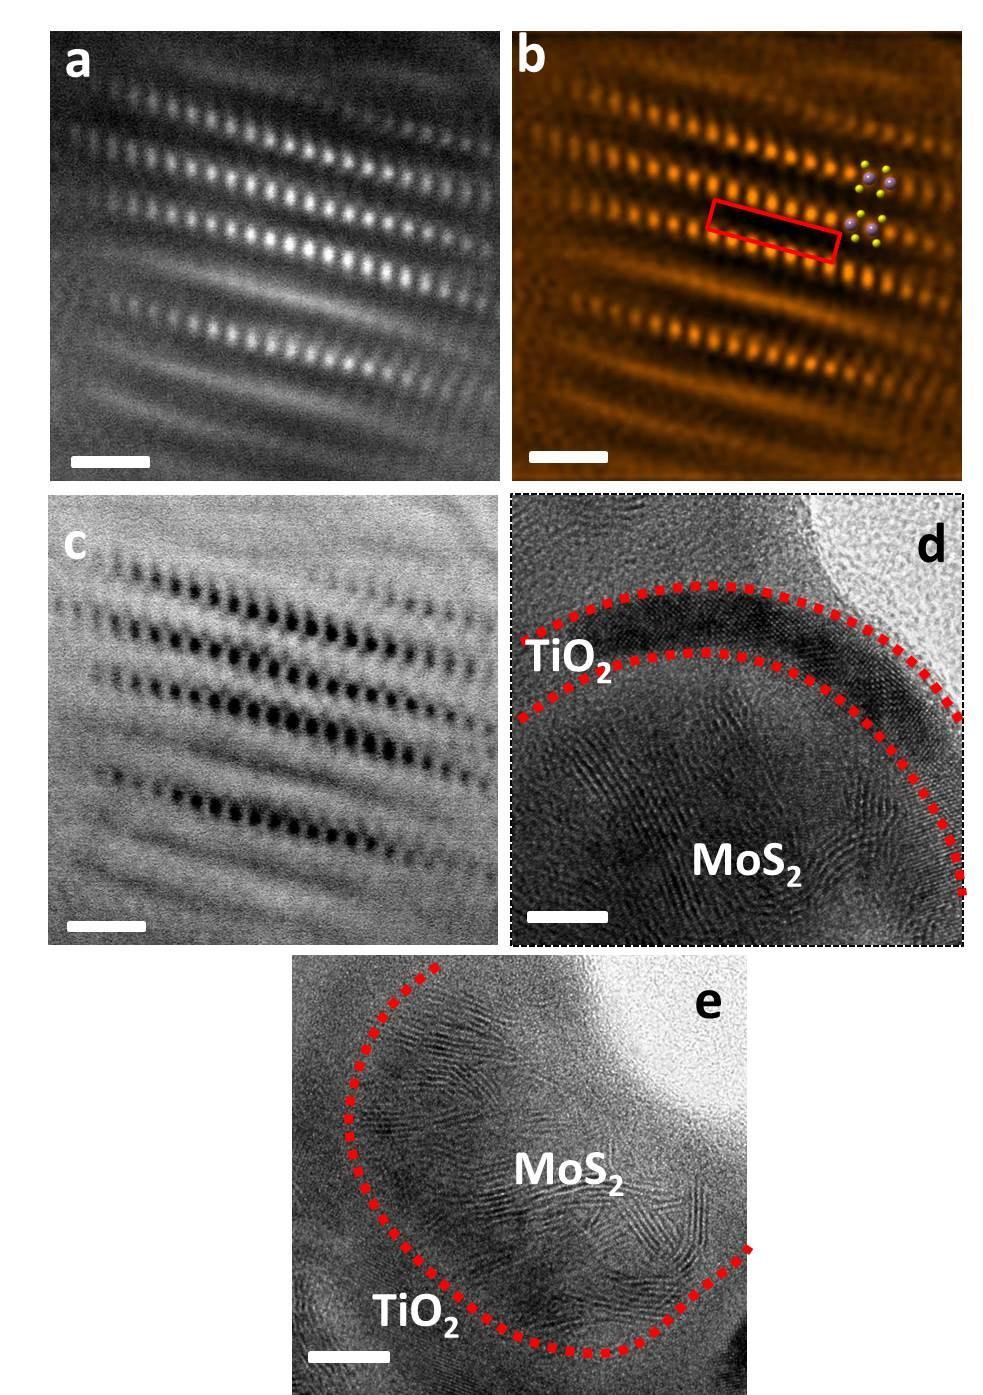 Fig. S2. (a) High angle annular dark field scanning transmission electron microscopy (HAADF-STEM) image and (c) corresponding bright field (BF) image of MoS 2.